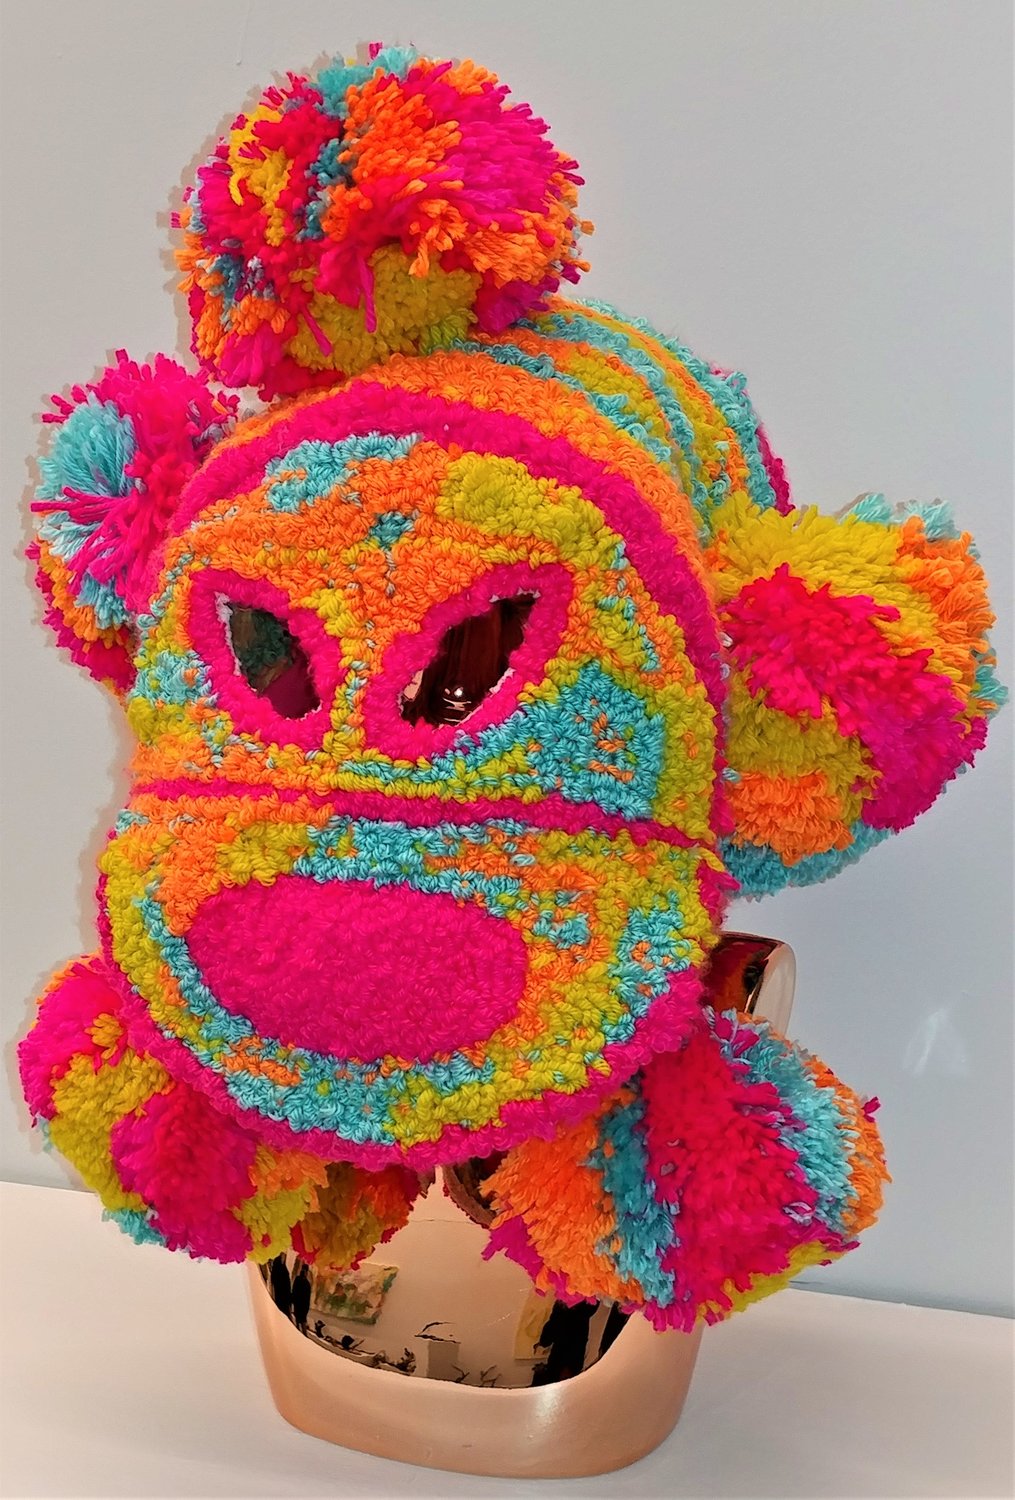 “Hijes Del Sol Y El Mar,” by Elizabeth Peralta. The exhibit, created in 2021, is acrylic and wool yarn, thread, monks cloth, glue, liquid latex and felt. It “unapologetically claims the wearer's Indigenous ancestry,” UAM said, and “offers the viewer a moment of connection.” Visit www.handtoolsofresilience.com.